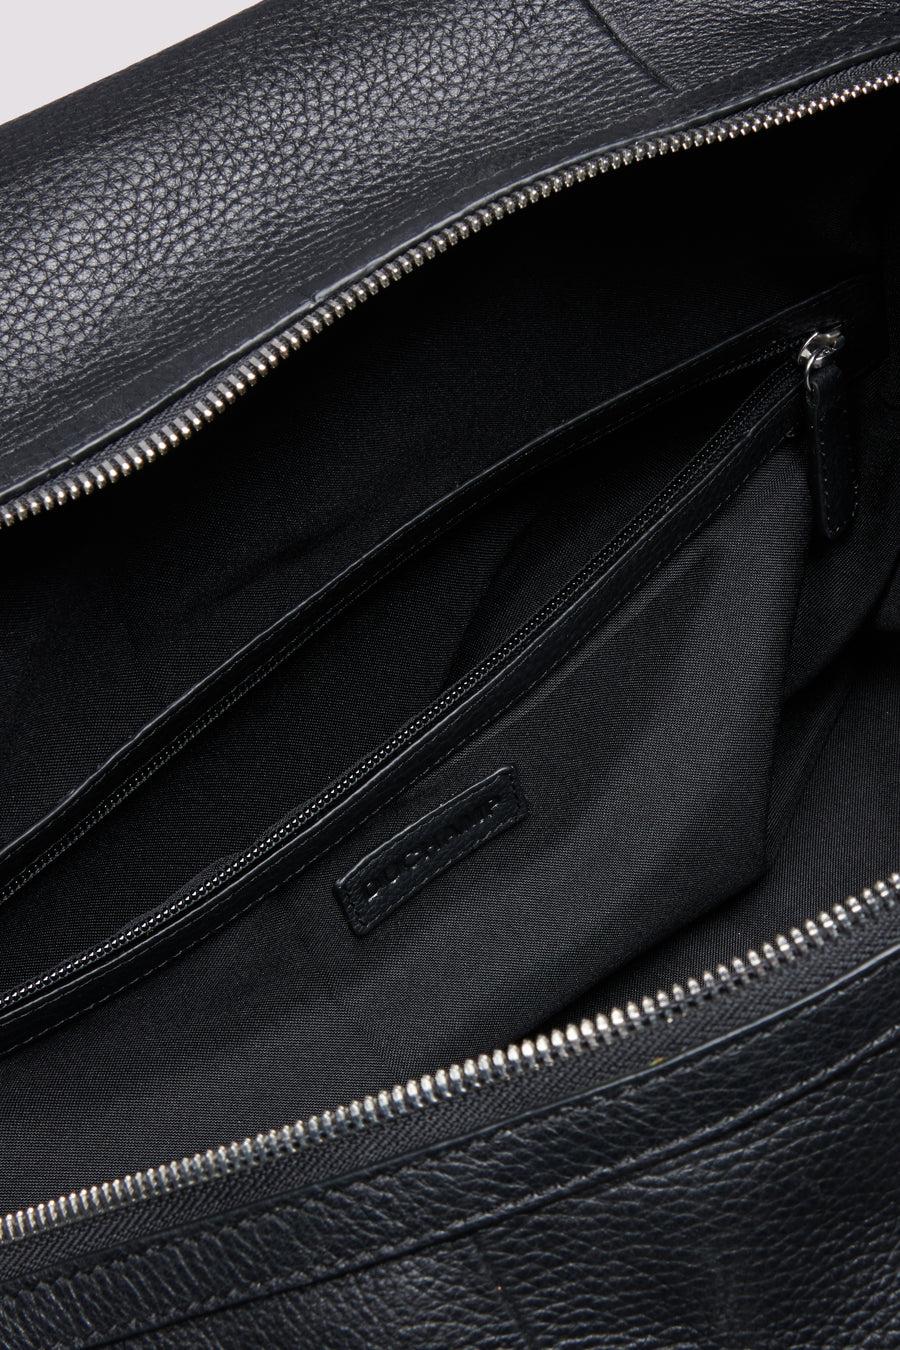 Weekend Leather in Holdall Black